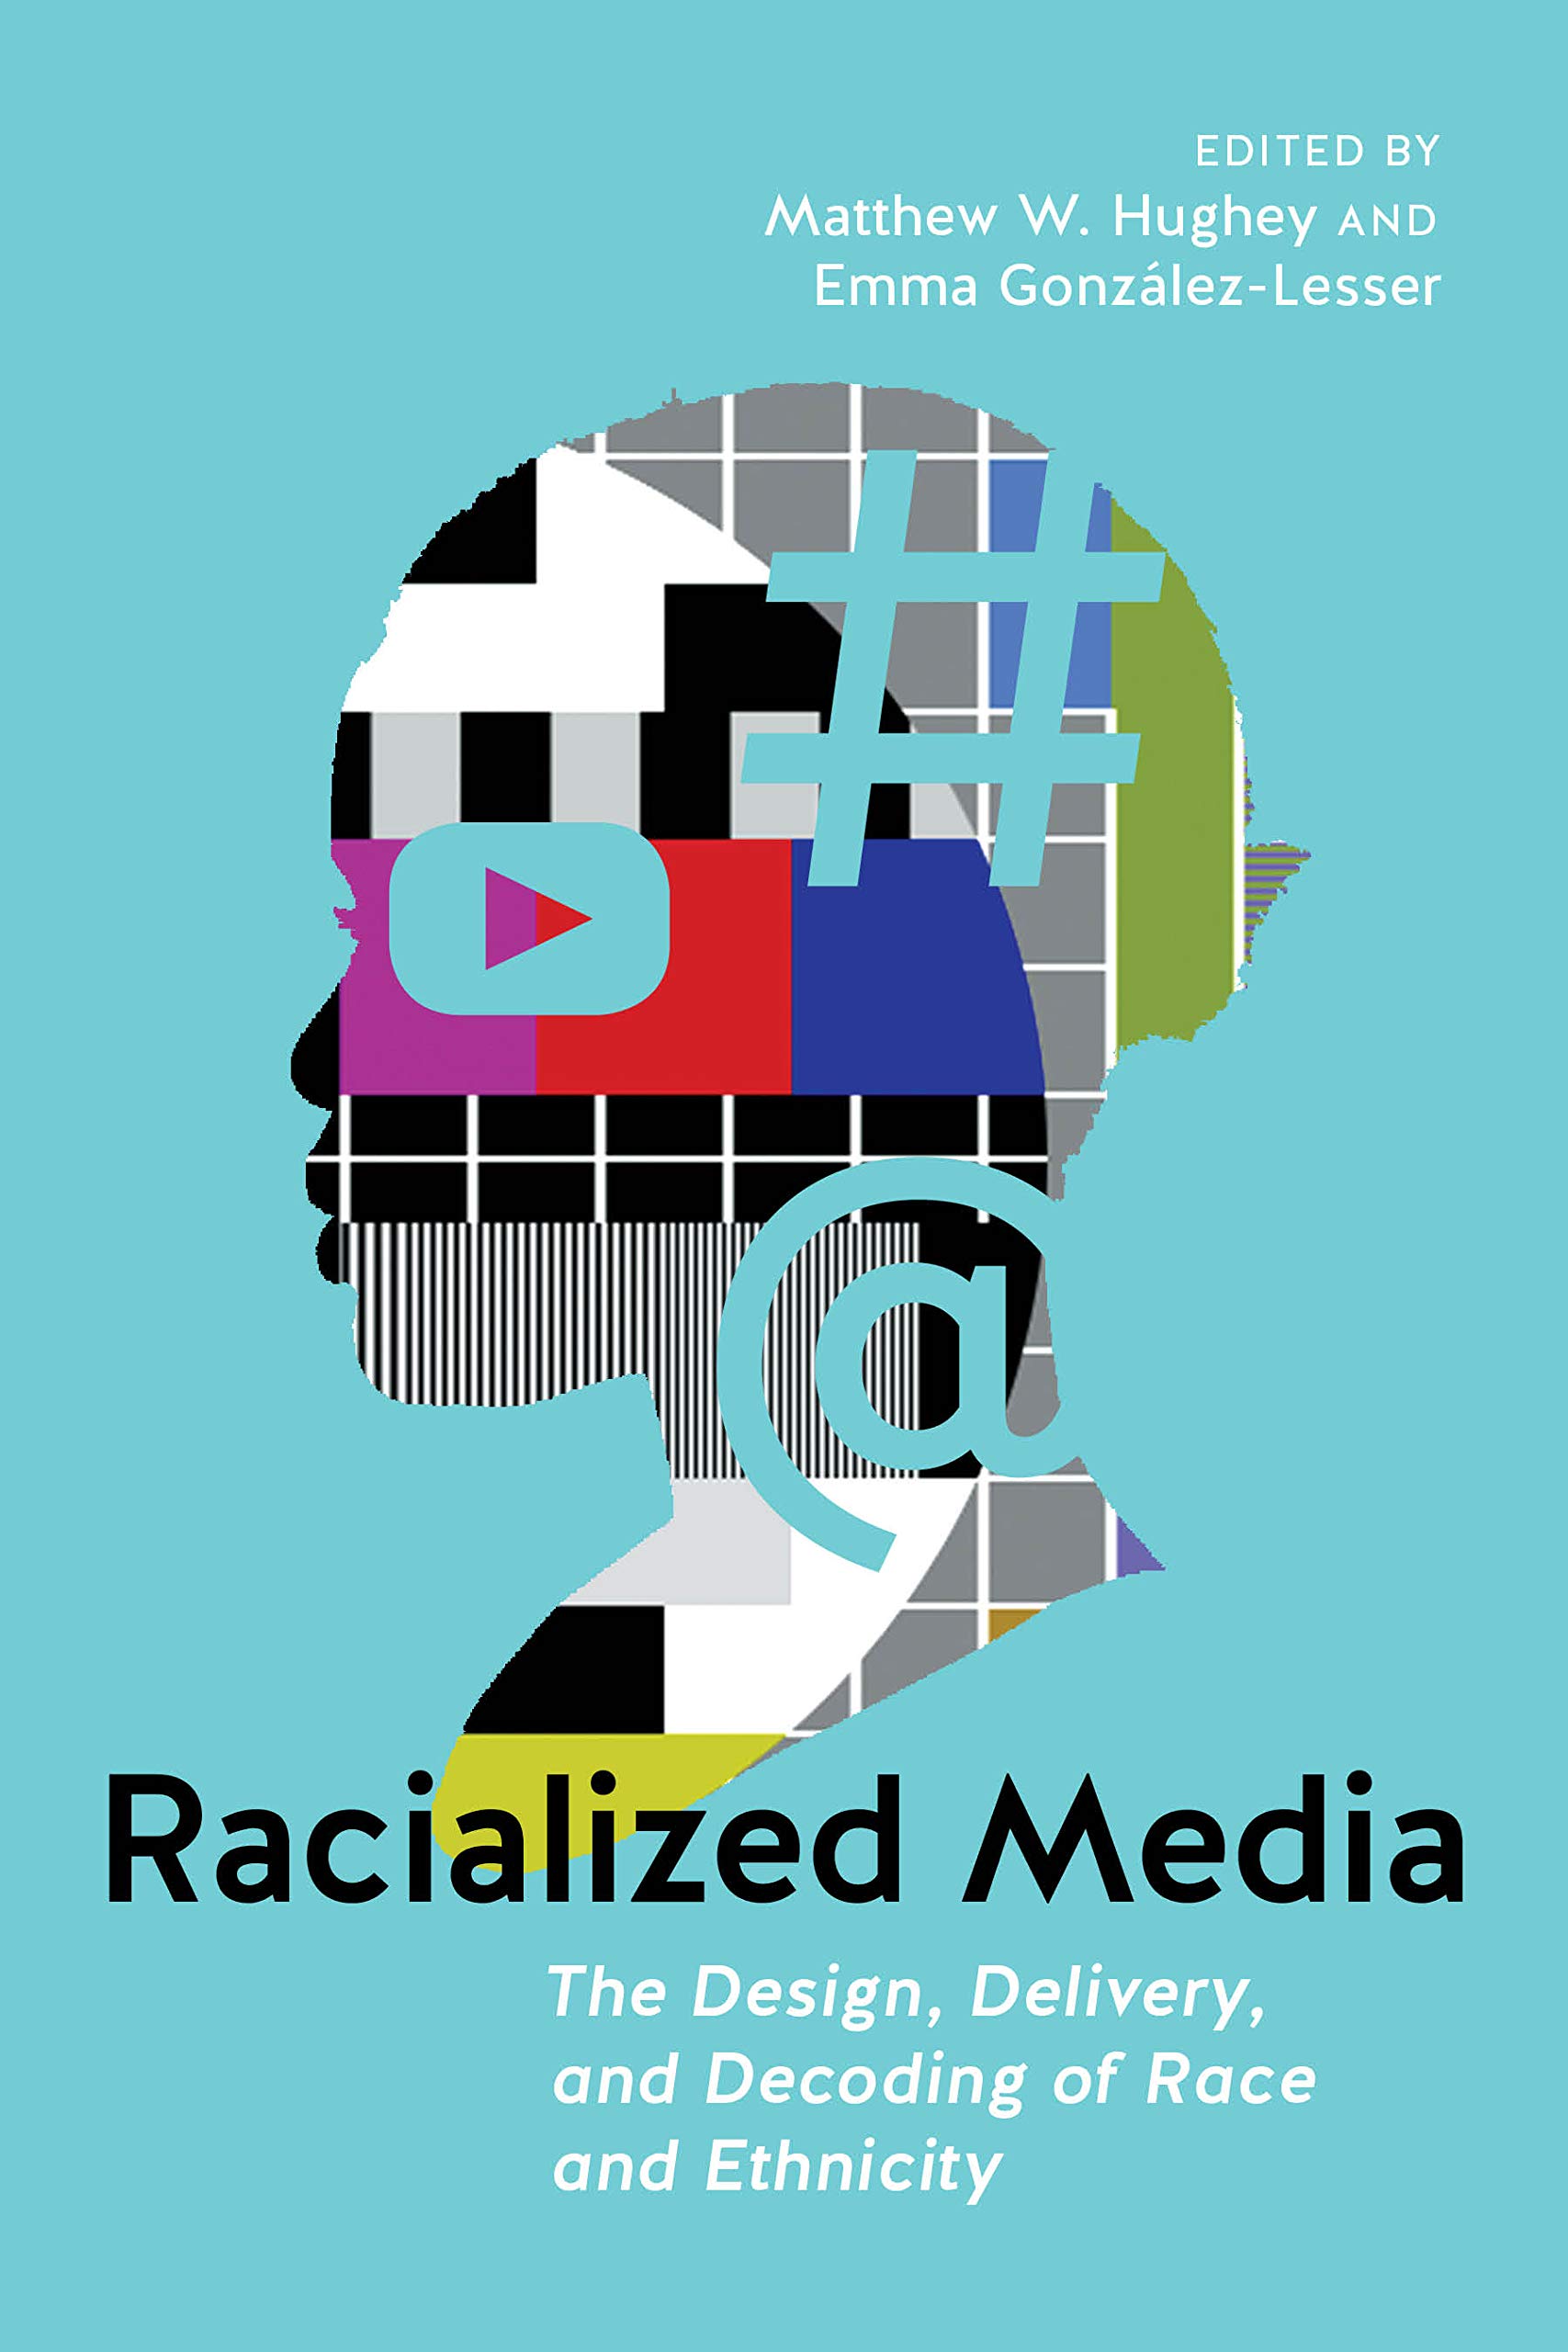 Racialized Media: The Design, Delivery, and Decoding of Race and Ethnicity